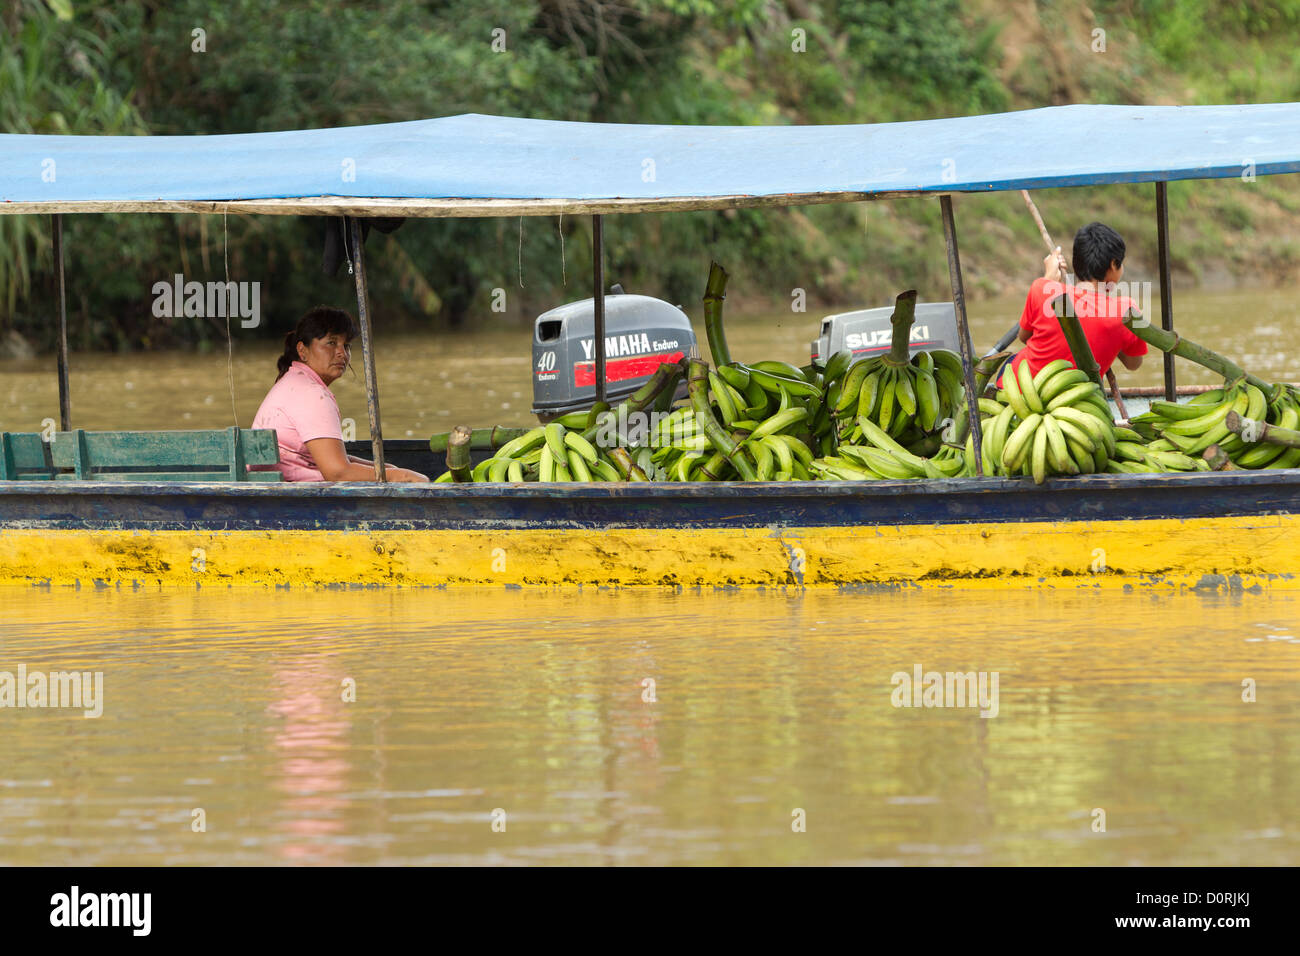 Adult Woman Brings To The Local Market A Pile Of Green Bananas By Boat Stock Photo